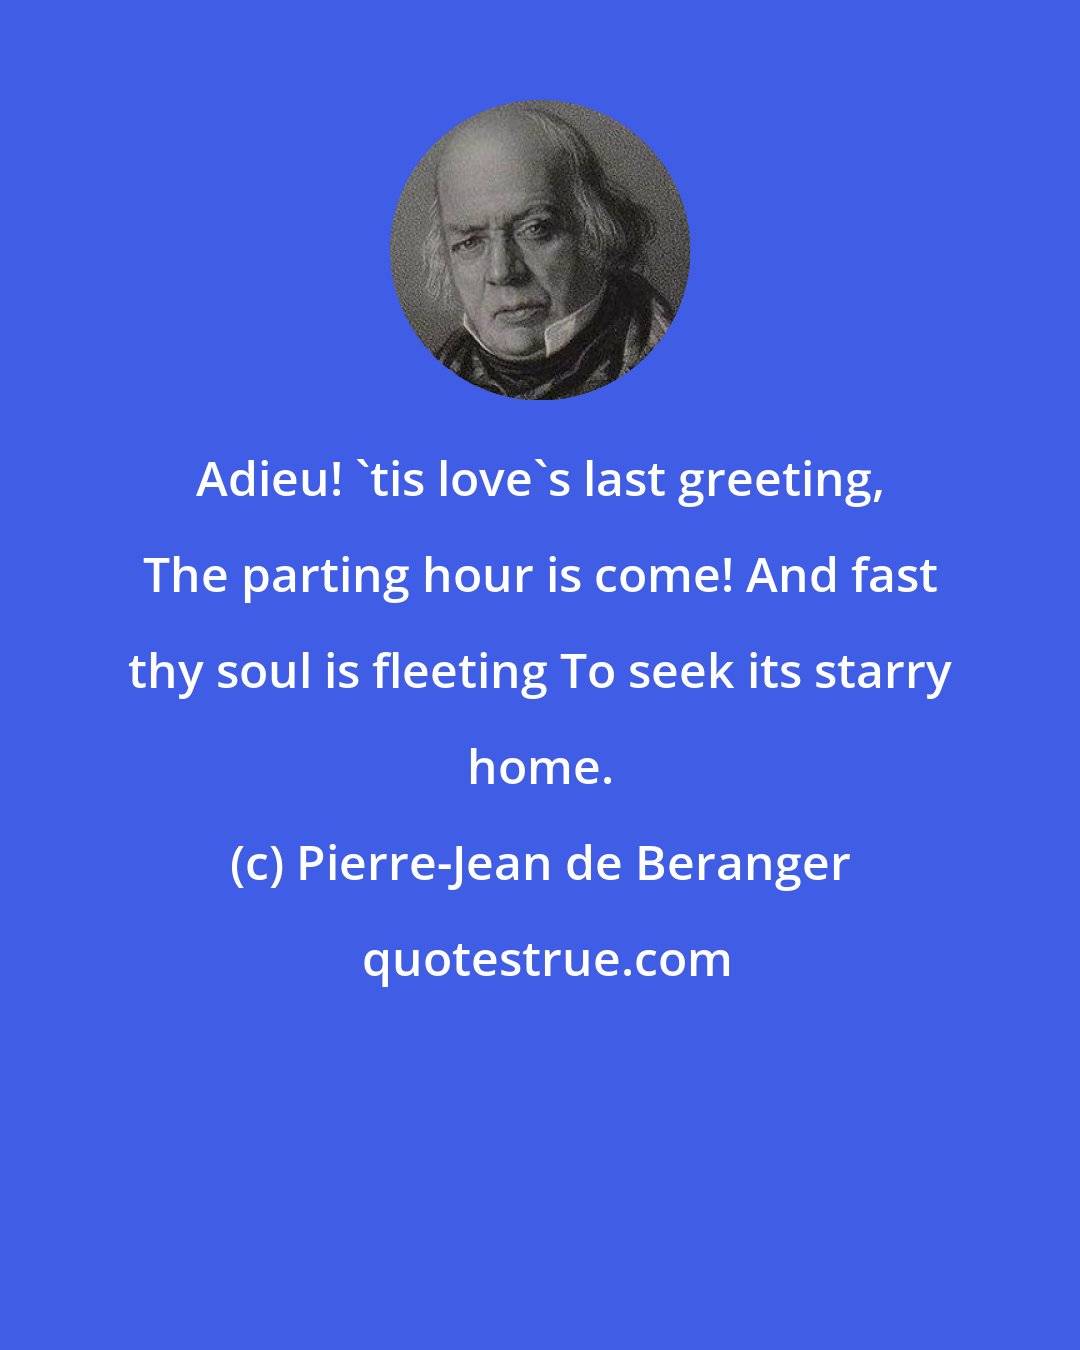 Pierre-Jean de Beranger: Adieu! 'tis love's last greeting, The parting hour is come! And fast thy soul is fleeting To seek its starry home.